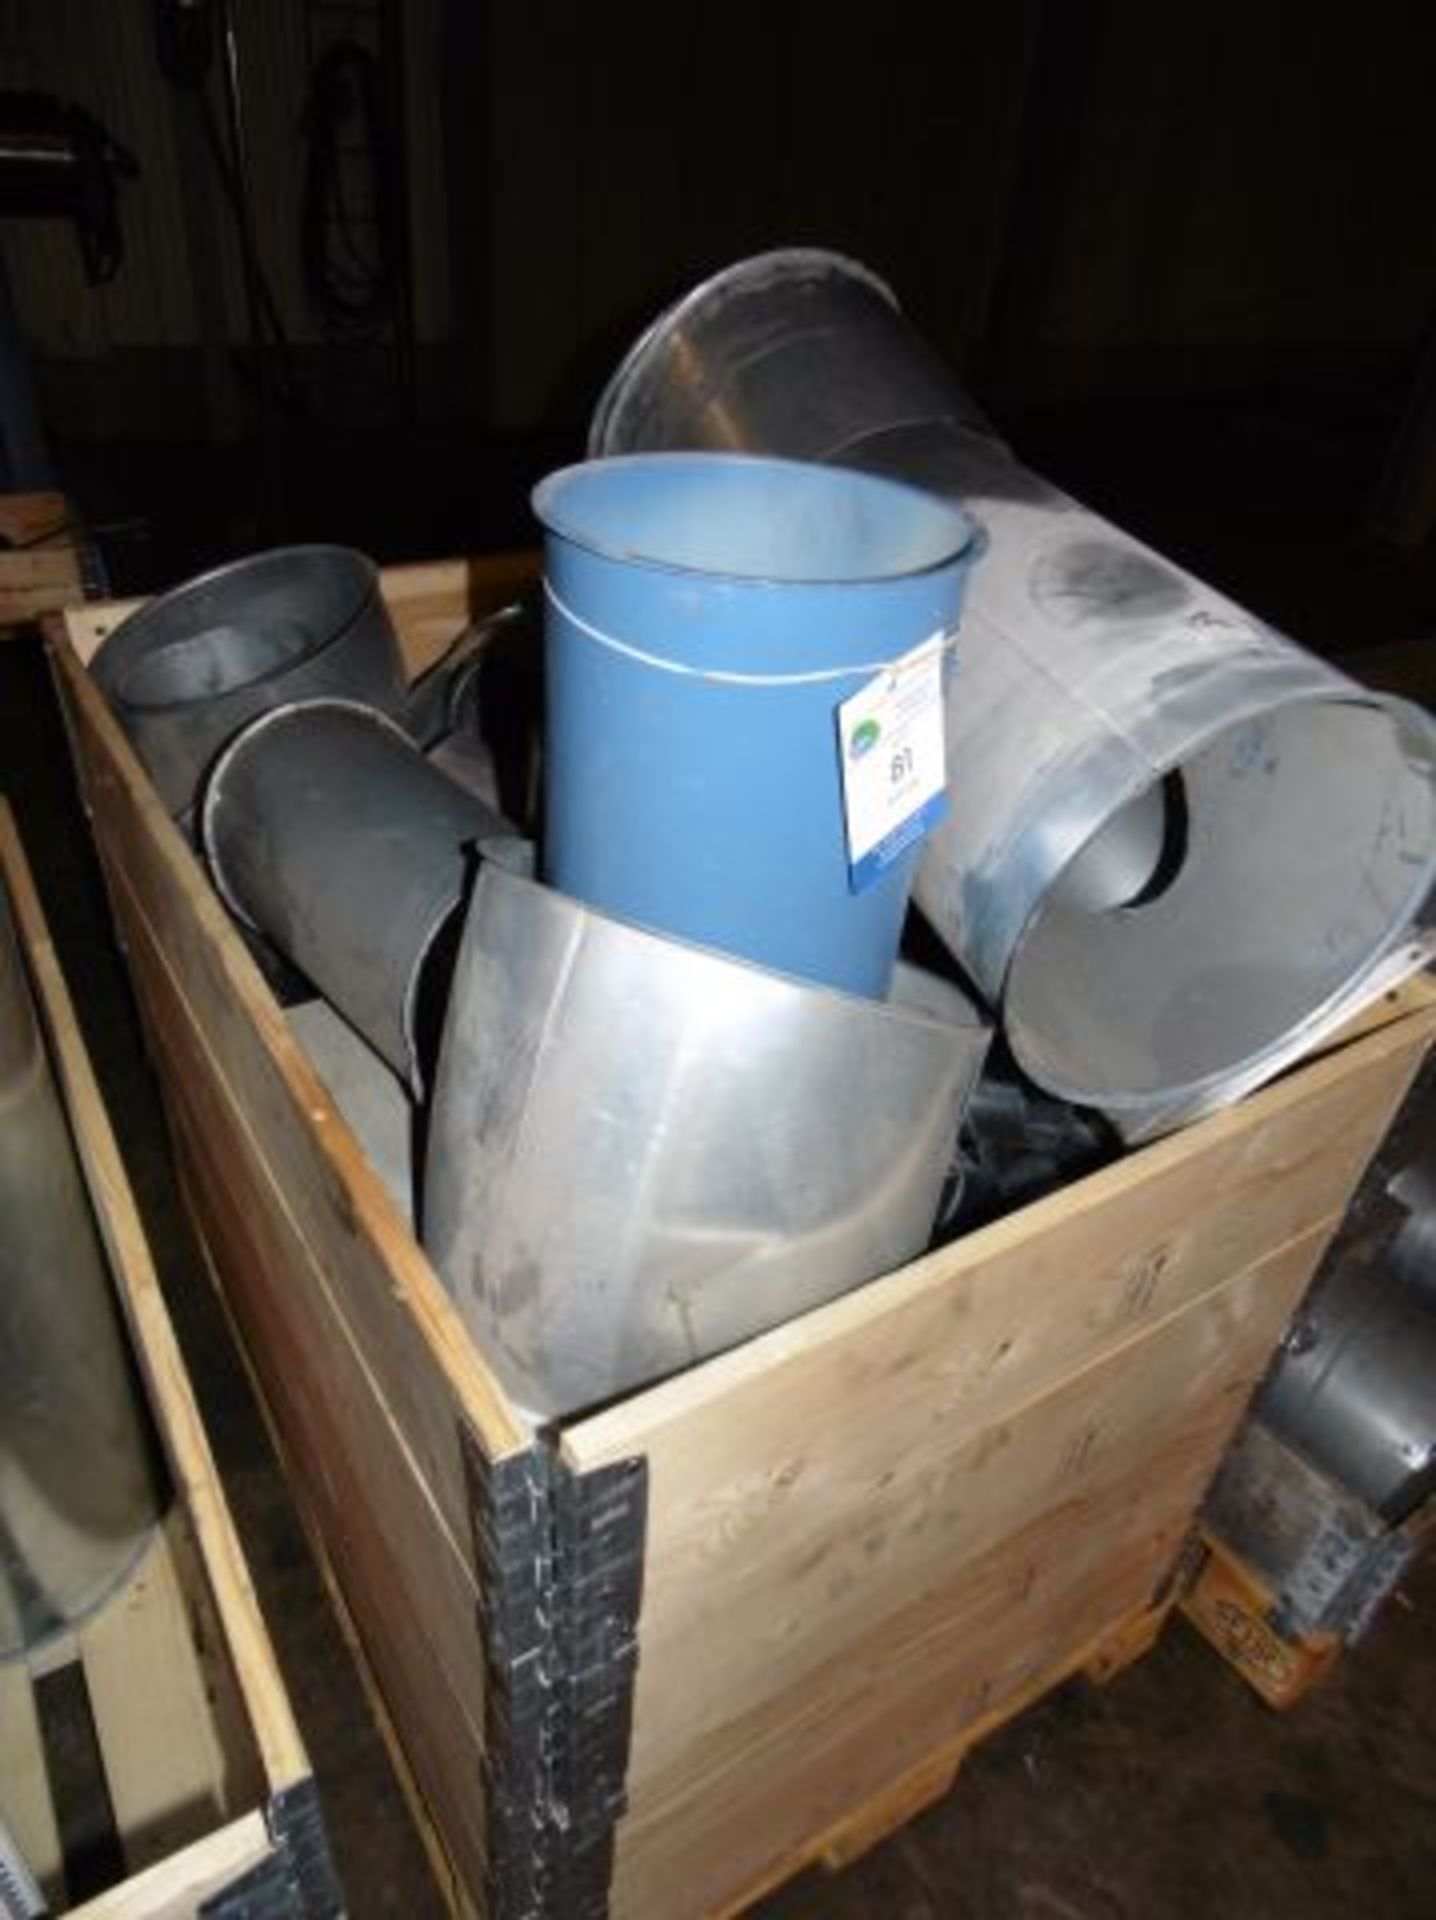 * Stillage of Steel Extraction Ducting Bends, Junctions etc. Loaded onto Buyer's Transport